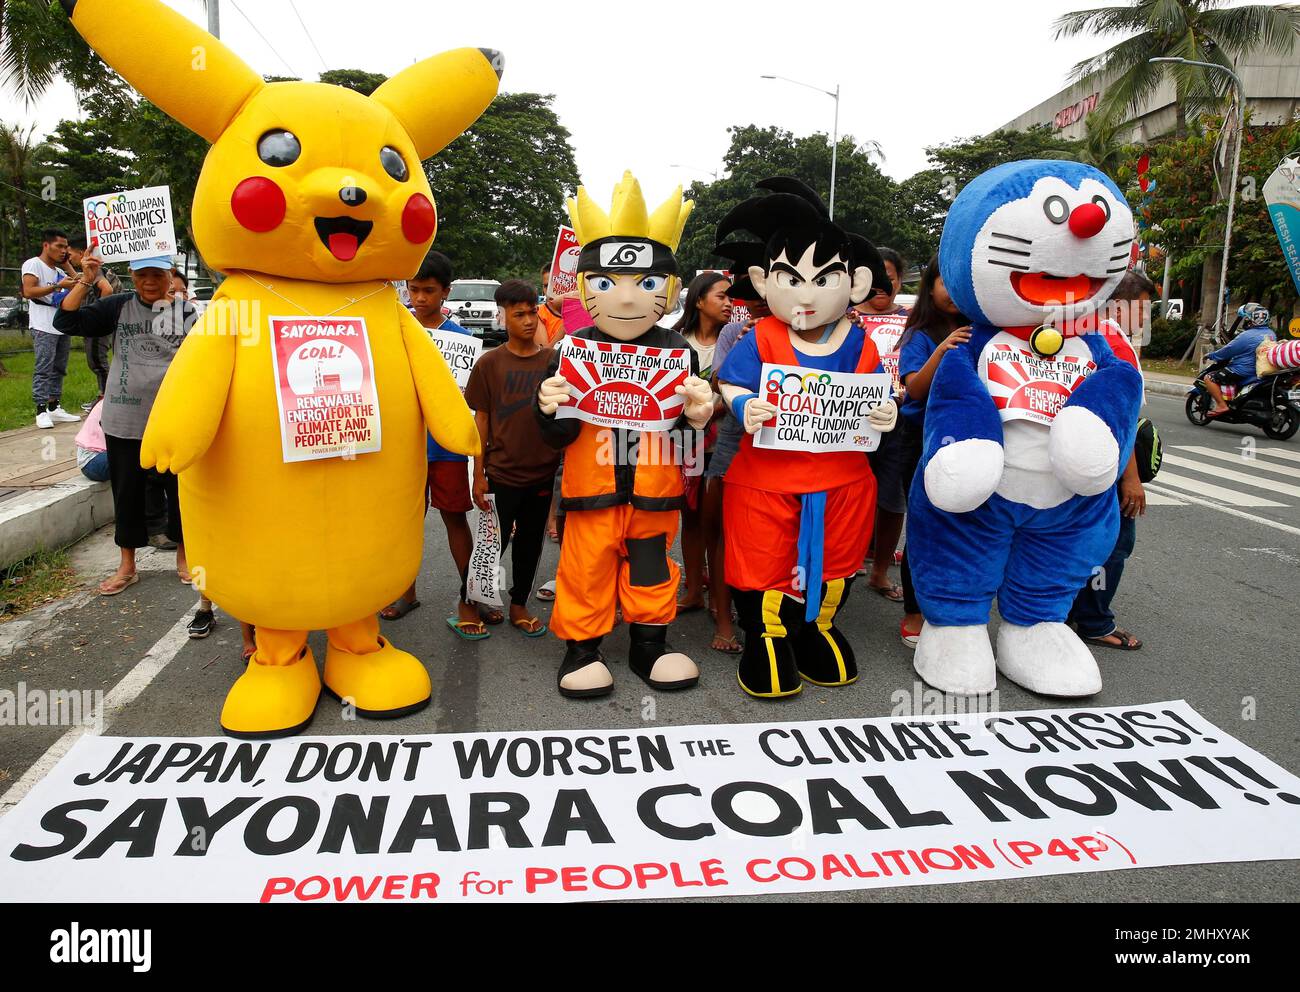 Environmental activists, dressed in anime costumes as, from left, Pikachu, Naruto, Goku and Doraemon, join other activists in a rally to call on Japanese government to stop funding coal especially to the ASEAN region, which they claim contributes to the worsening climate change globally Wednesday, Oct. 9, 2019 in suburban Pasay city, south of Manila, Philippines. The protest coincided with the ASEAN senior officials meeting on sports that was attended by Japan as it hosts the 2020 Olympics. (AP Photo/Bullit Marquez) Foto Stock